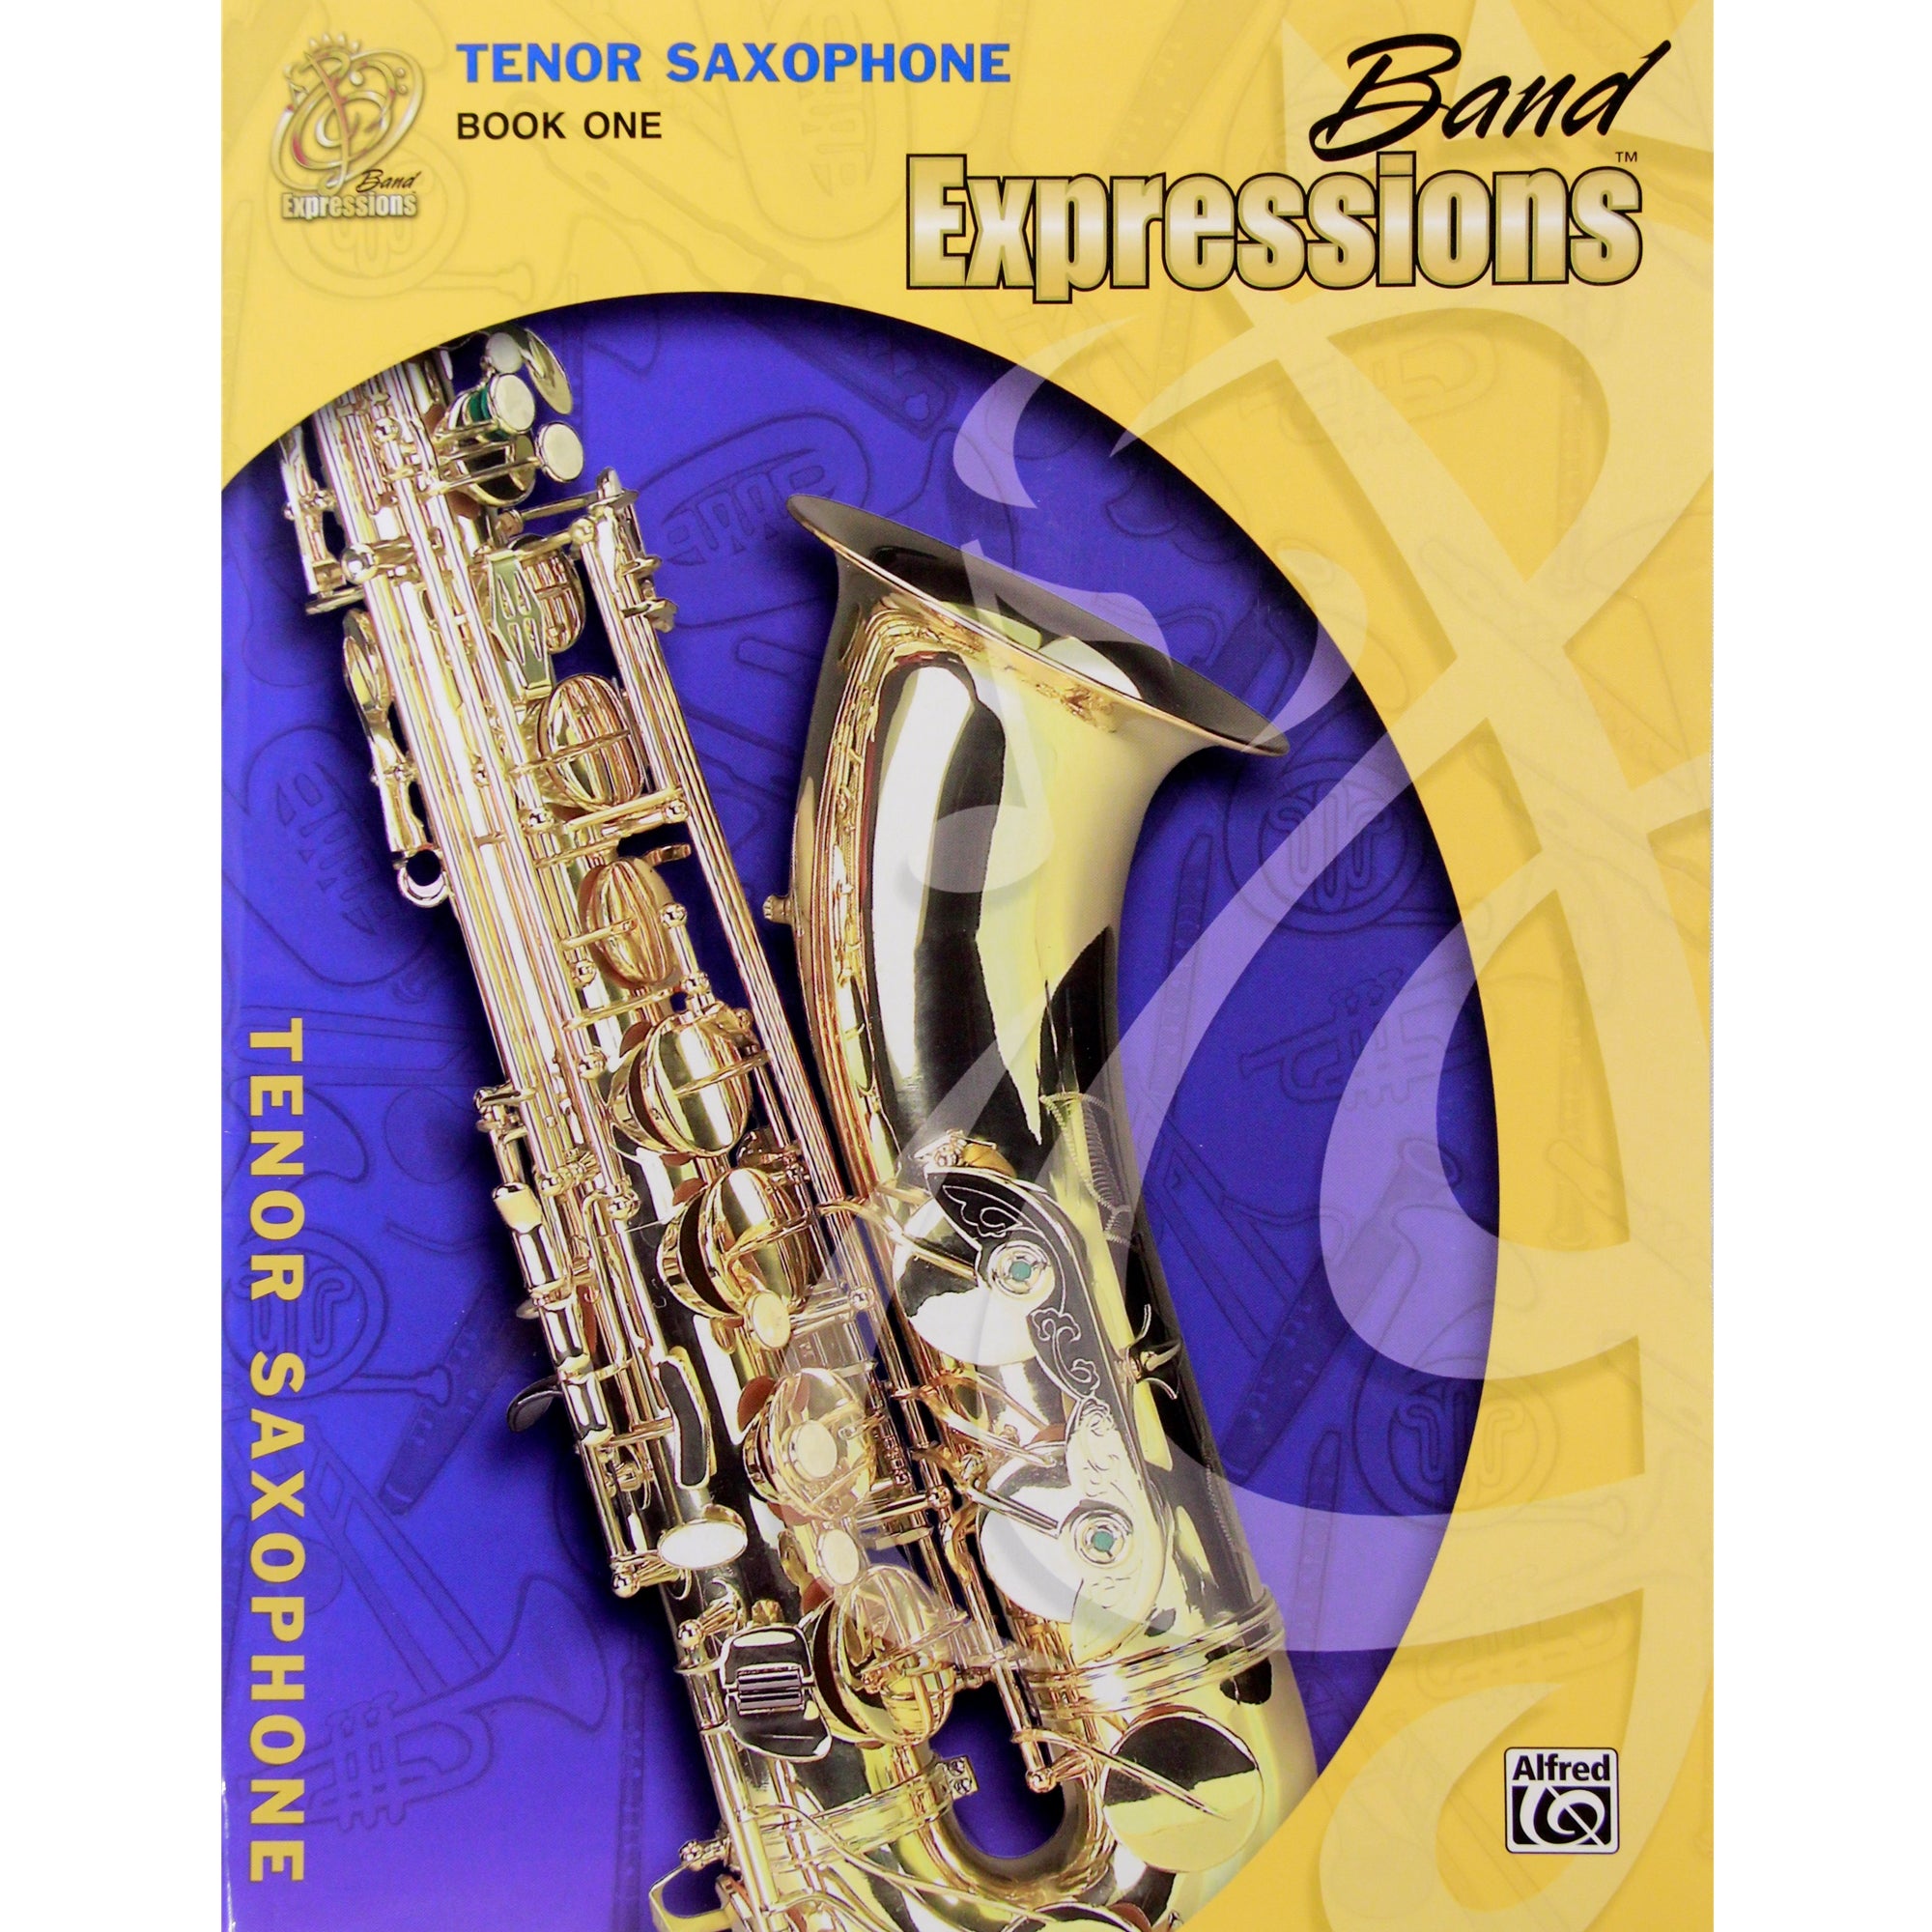 ALFRED 00MCB1009CDX Band Expressions , Book One: Student Edition [Tenor Saxophone]